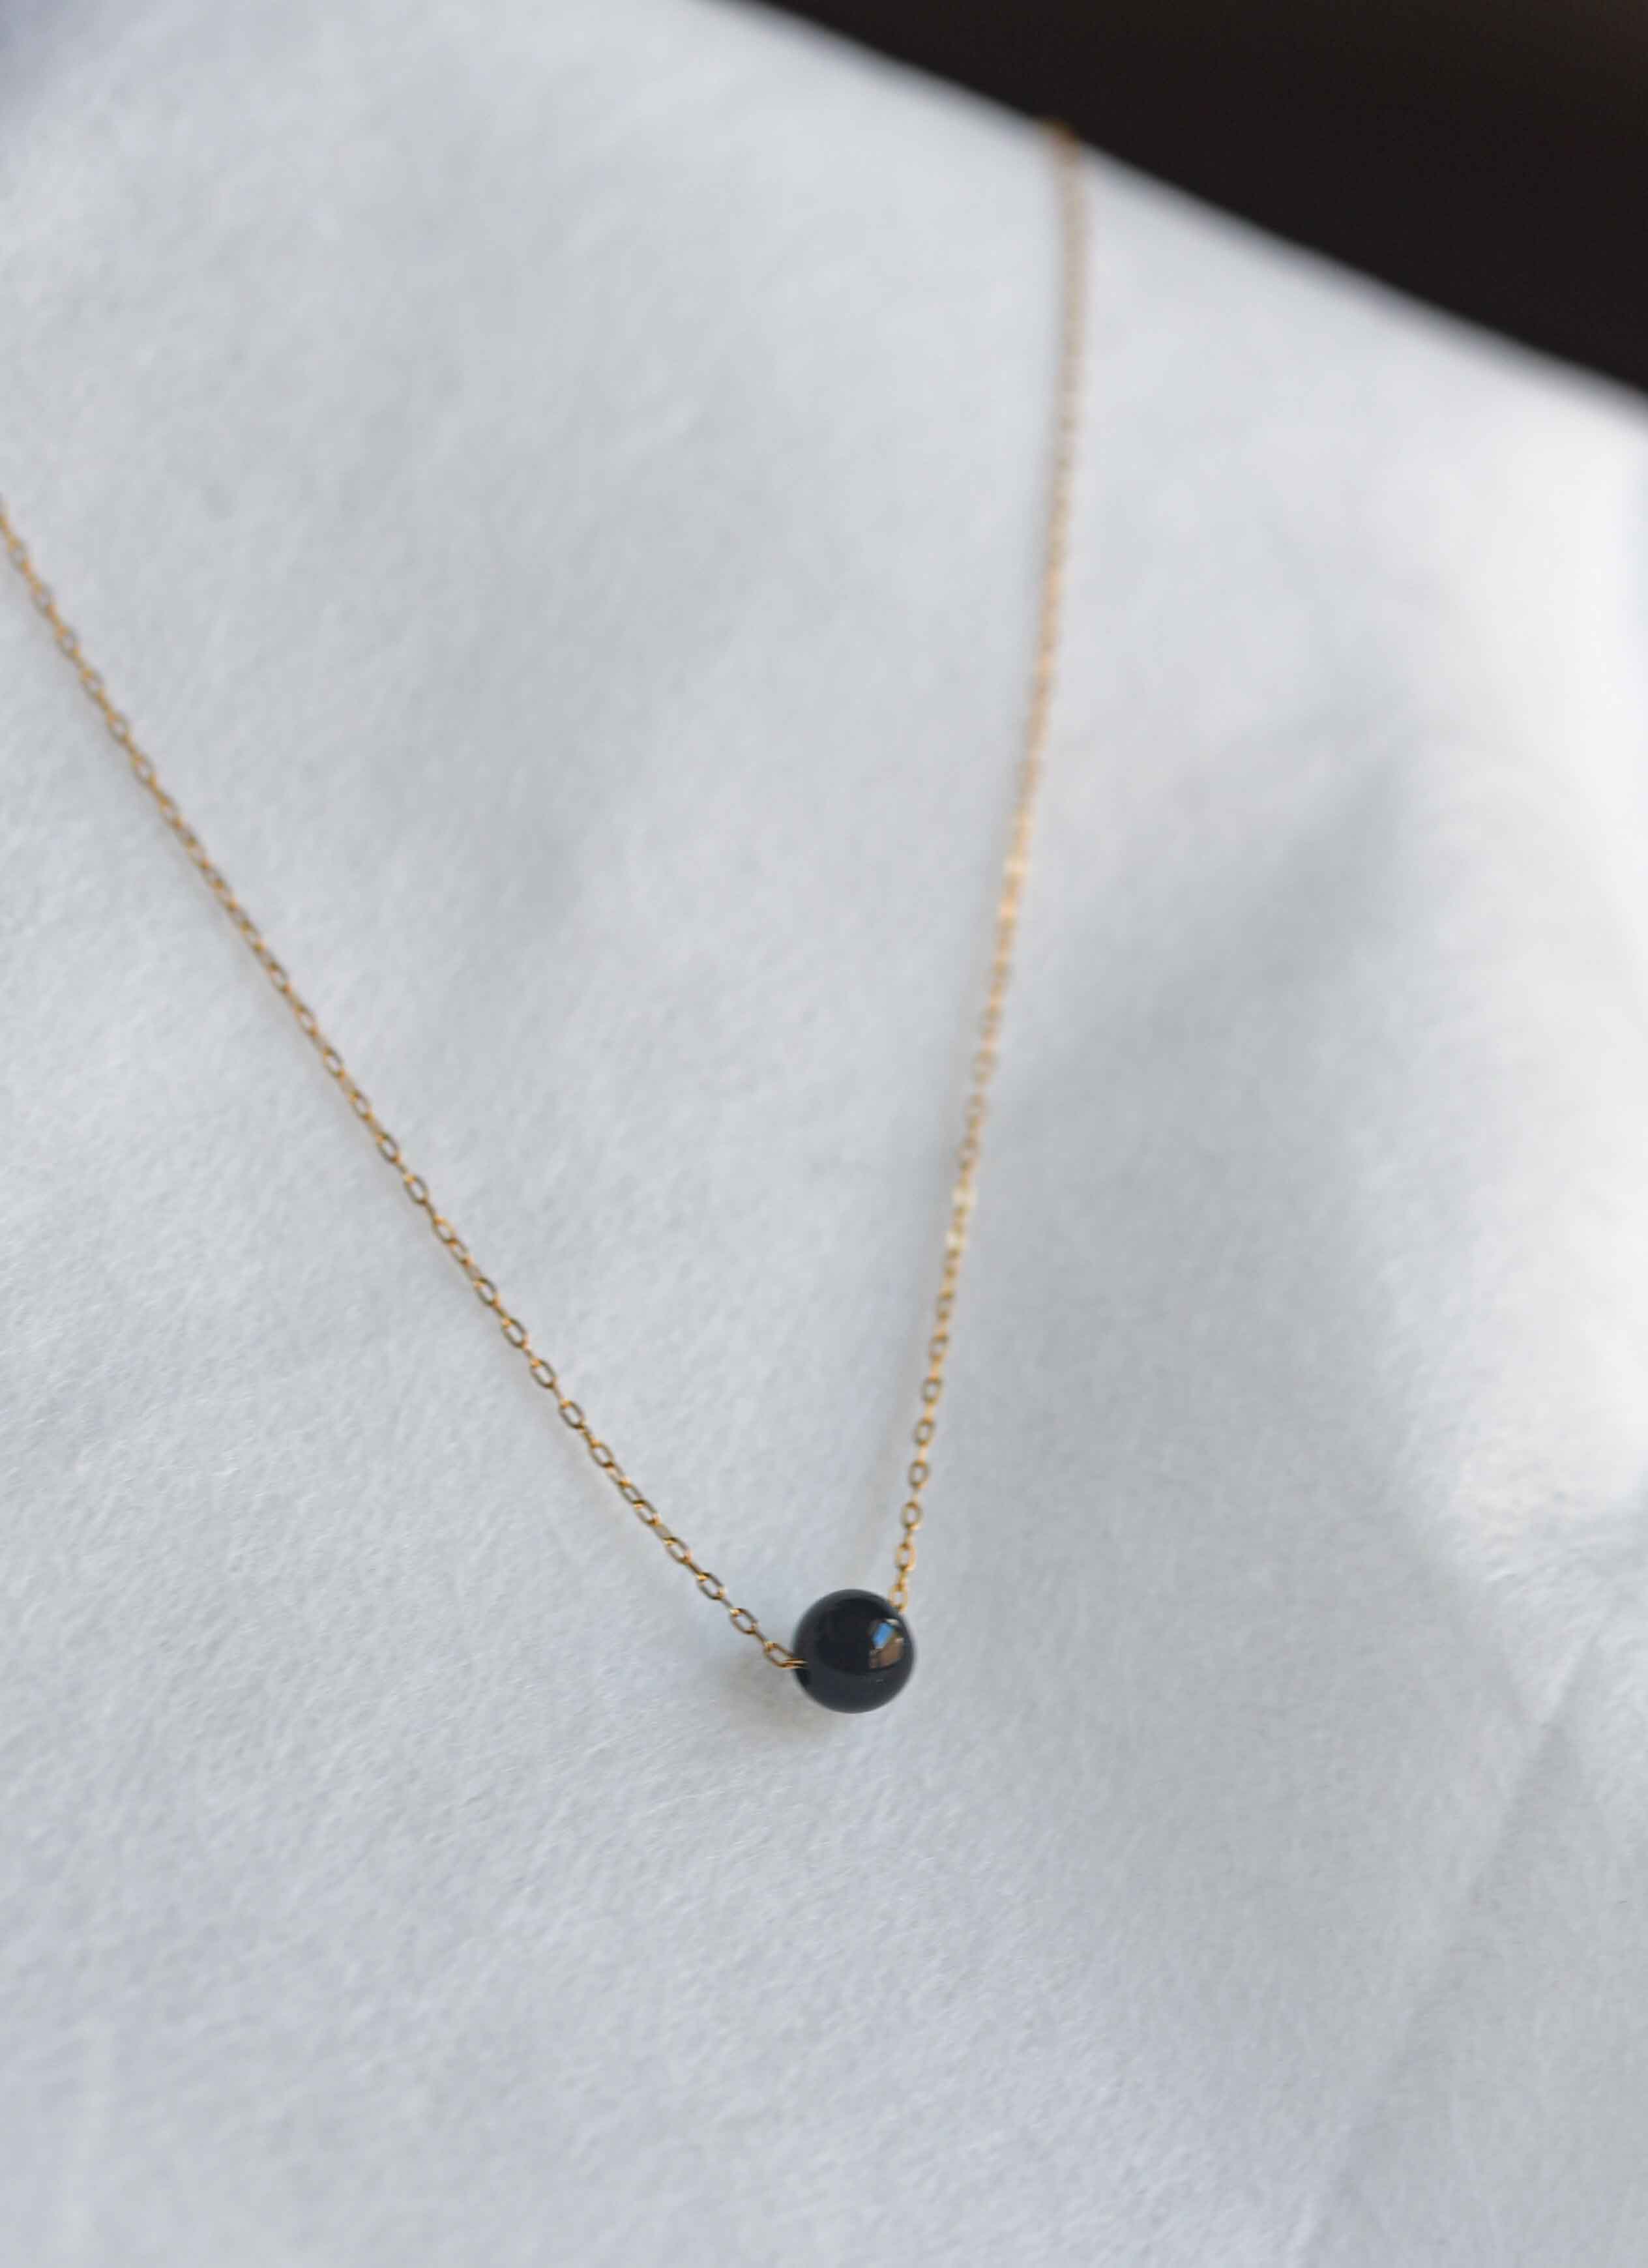 Black Onyx Heart Necklace with Diamonds Ball Chain